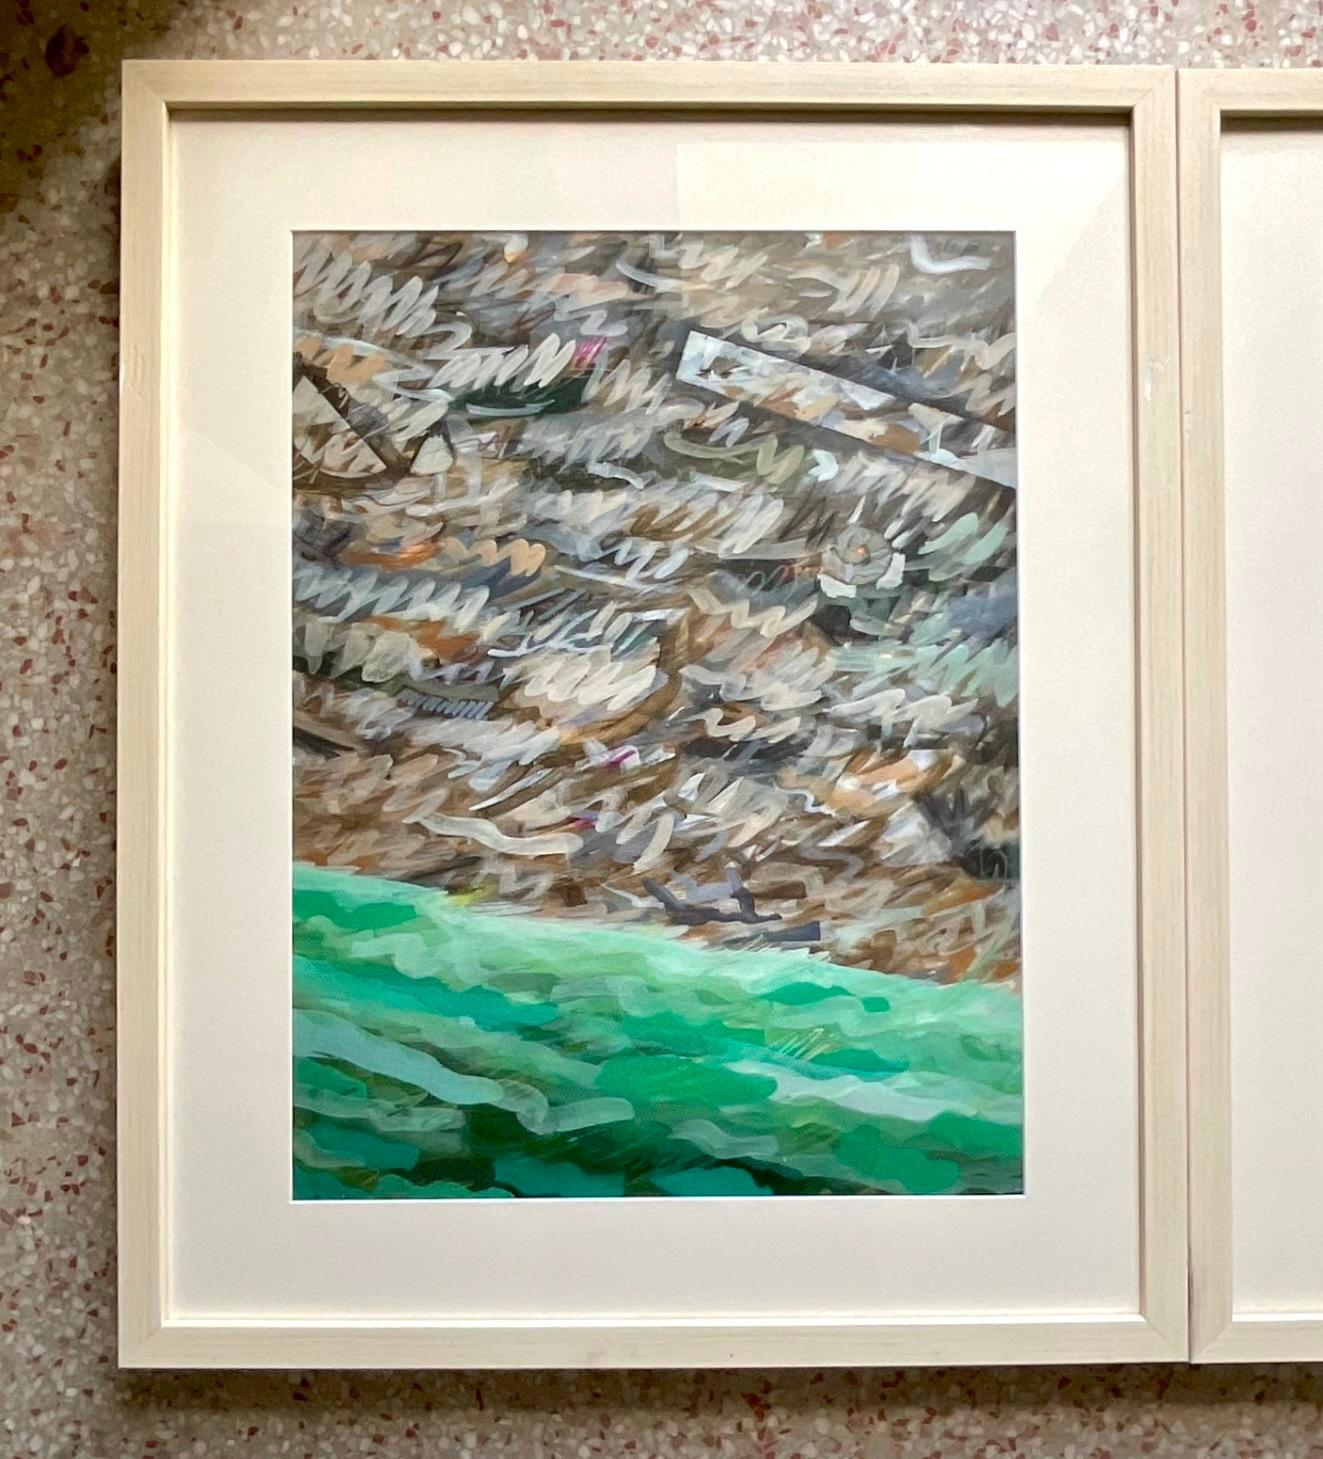 A fabulous set of two vintage original oil painting on paper. A chic Abstract composition in brilliant shades of green. Acquired from a Palm Beach estate.